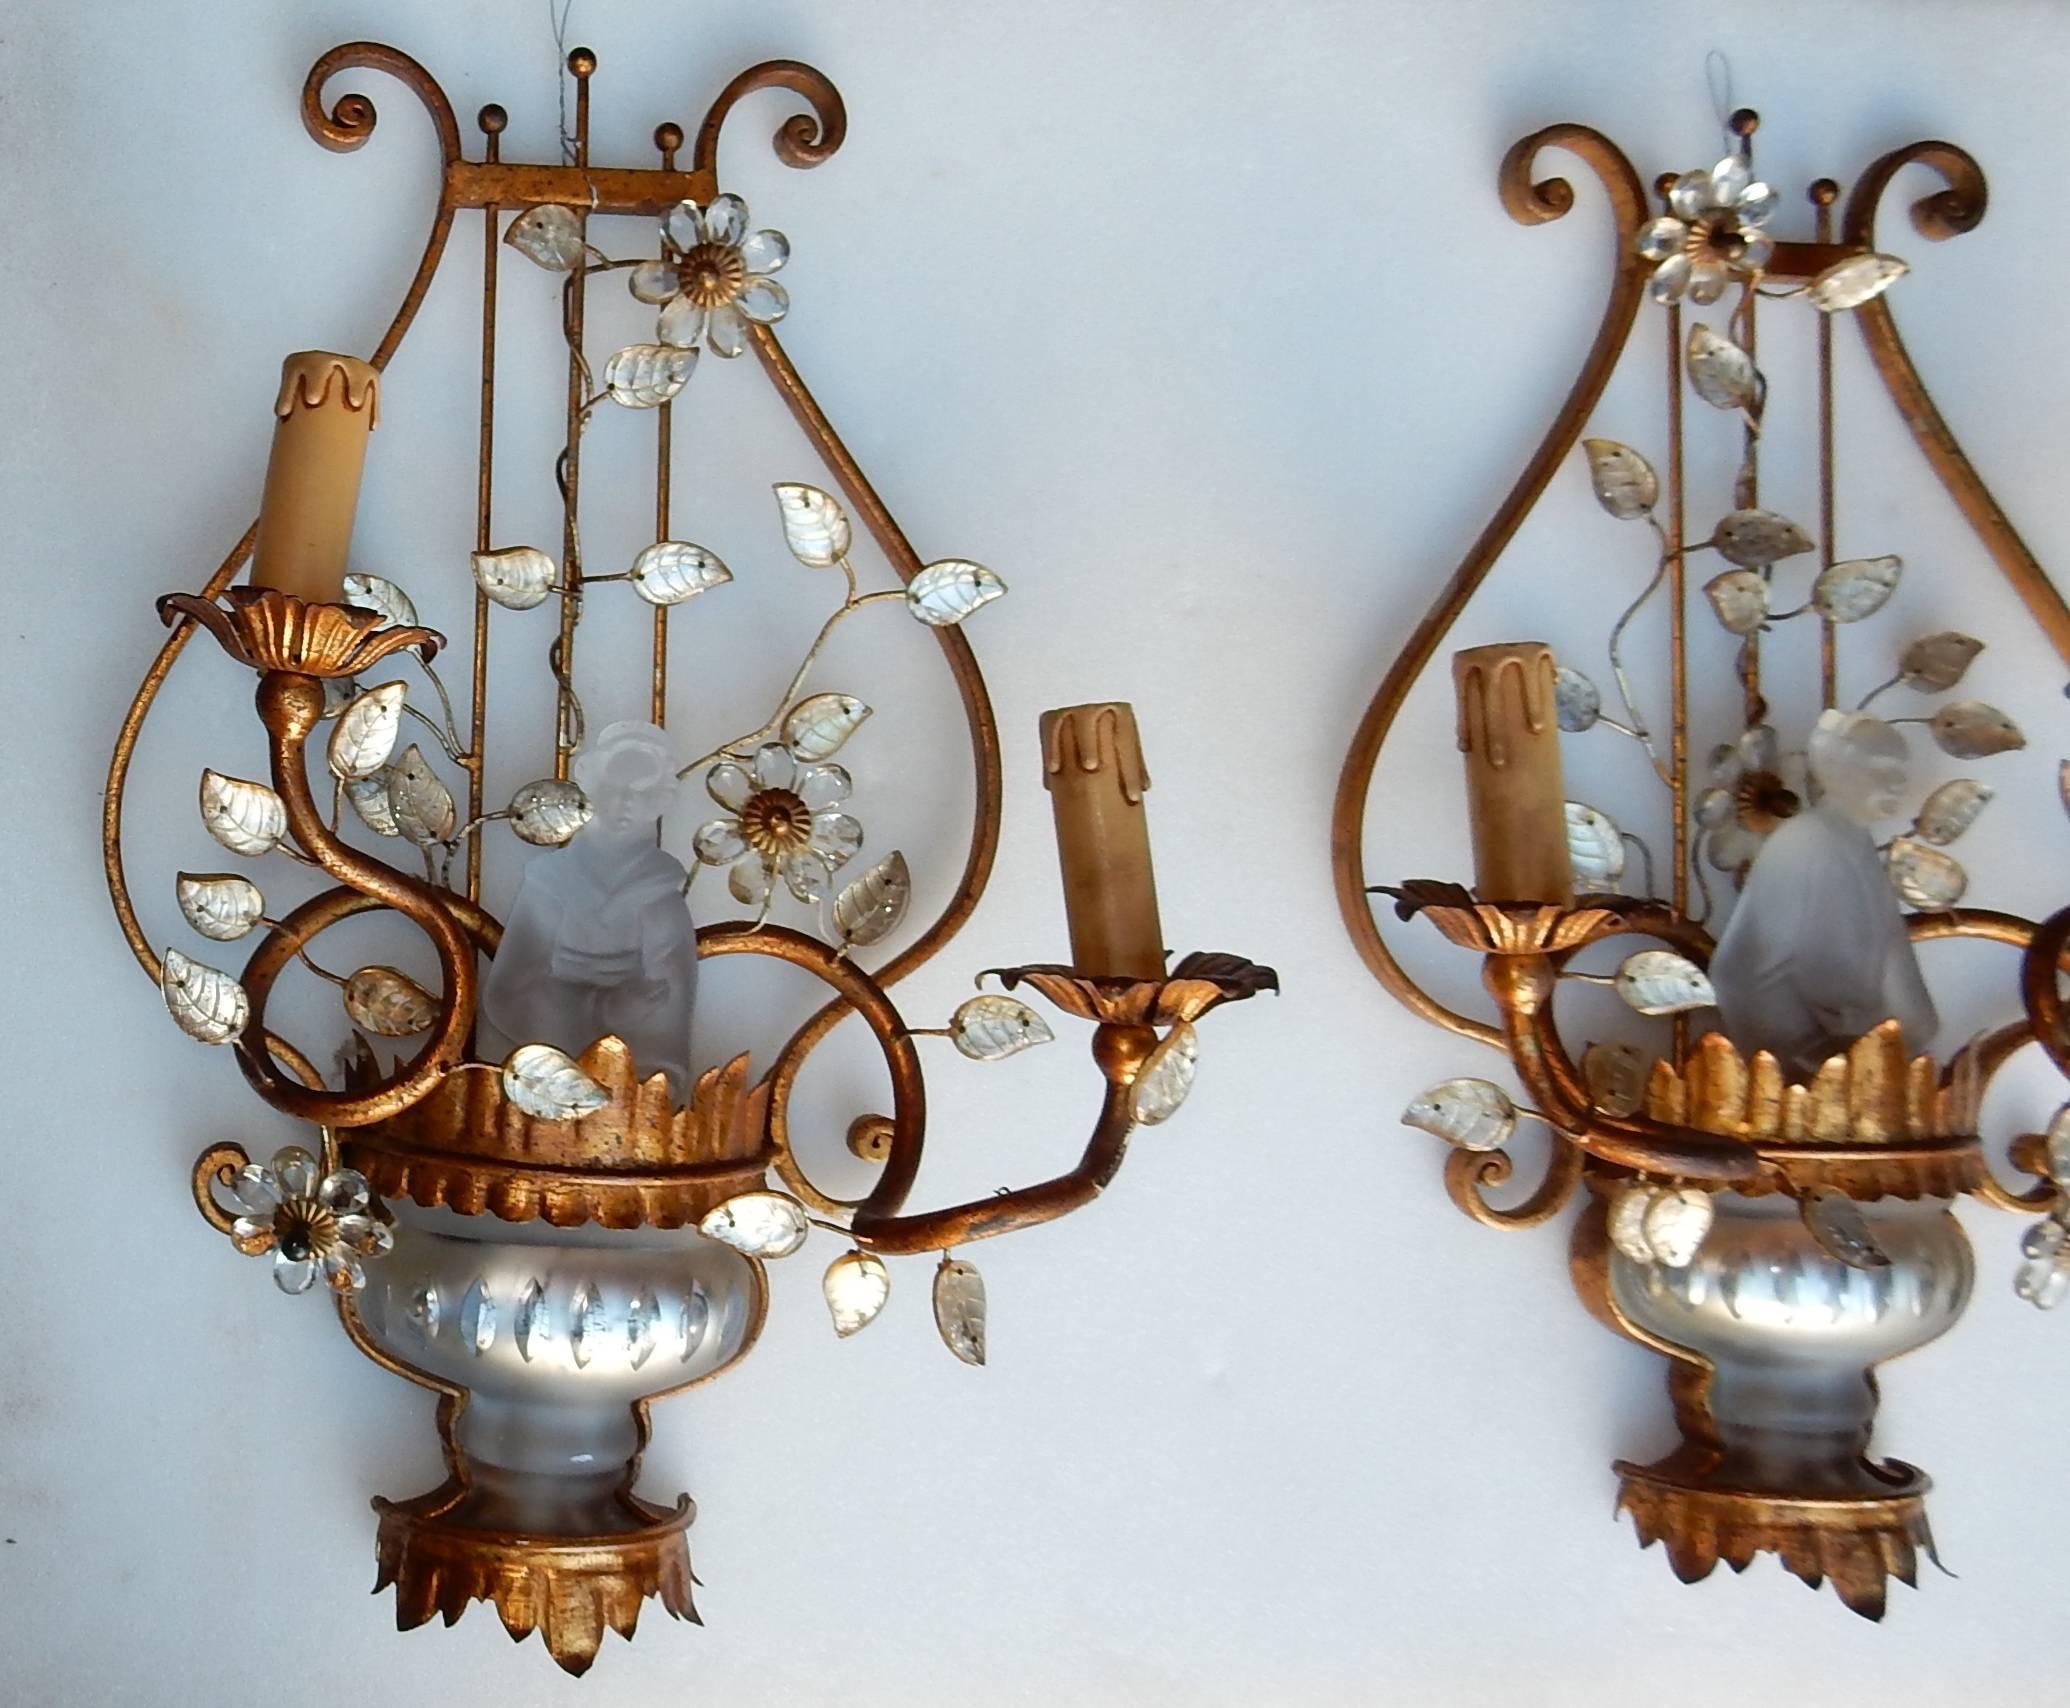 Gilded iron wall lamps decorated with crystal has decor of Chinese, mister and miss in Kimono,
circa 1970.
Good condition.